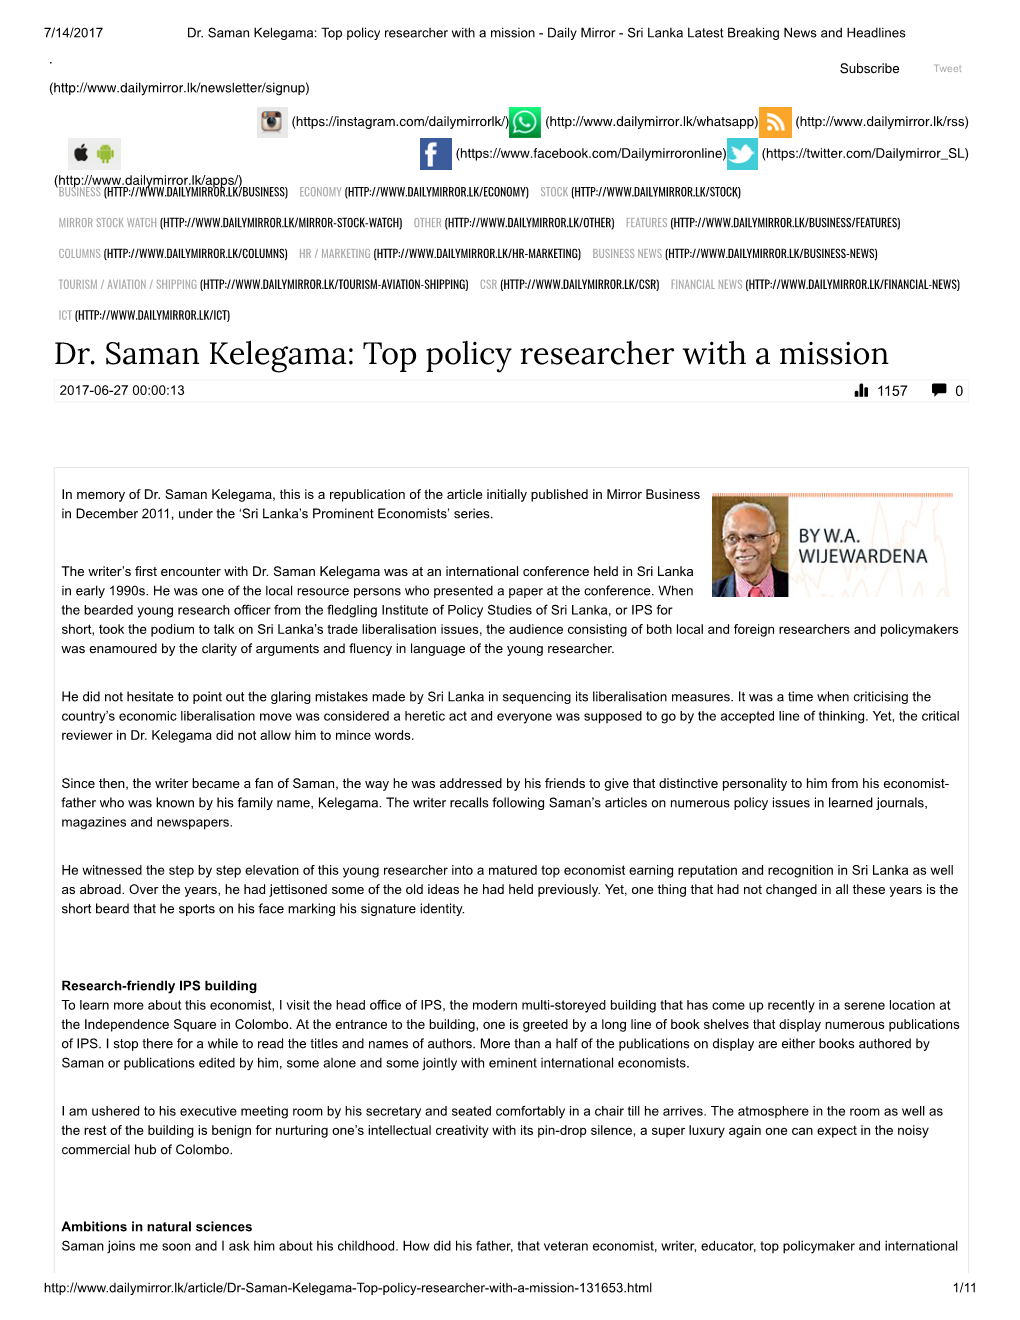 Dr. Saman Kelegama: Top Policy Researcher with a Mission - Daily Mirror - Sri Lanka Latest Breaking News and Headlines